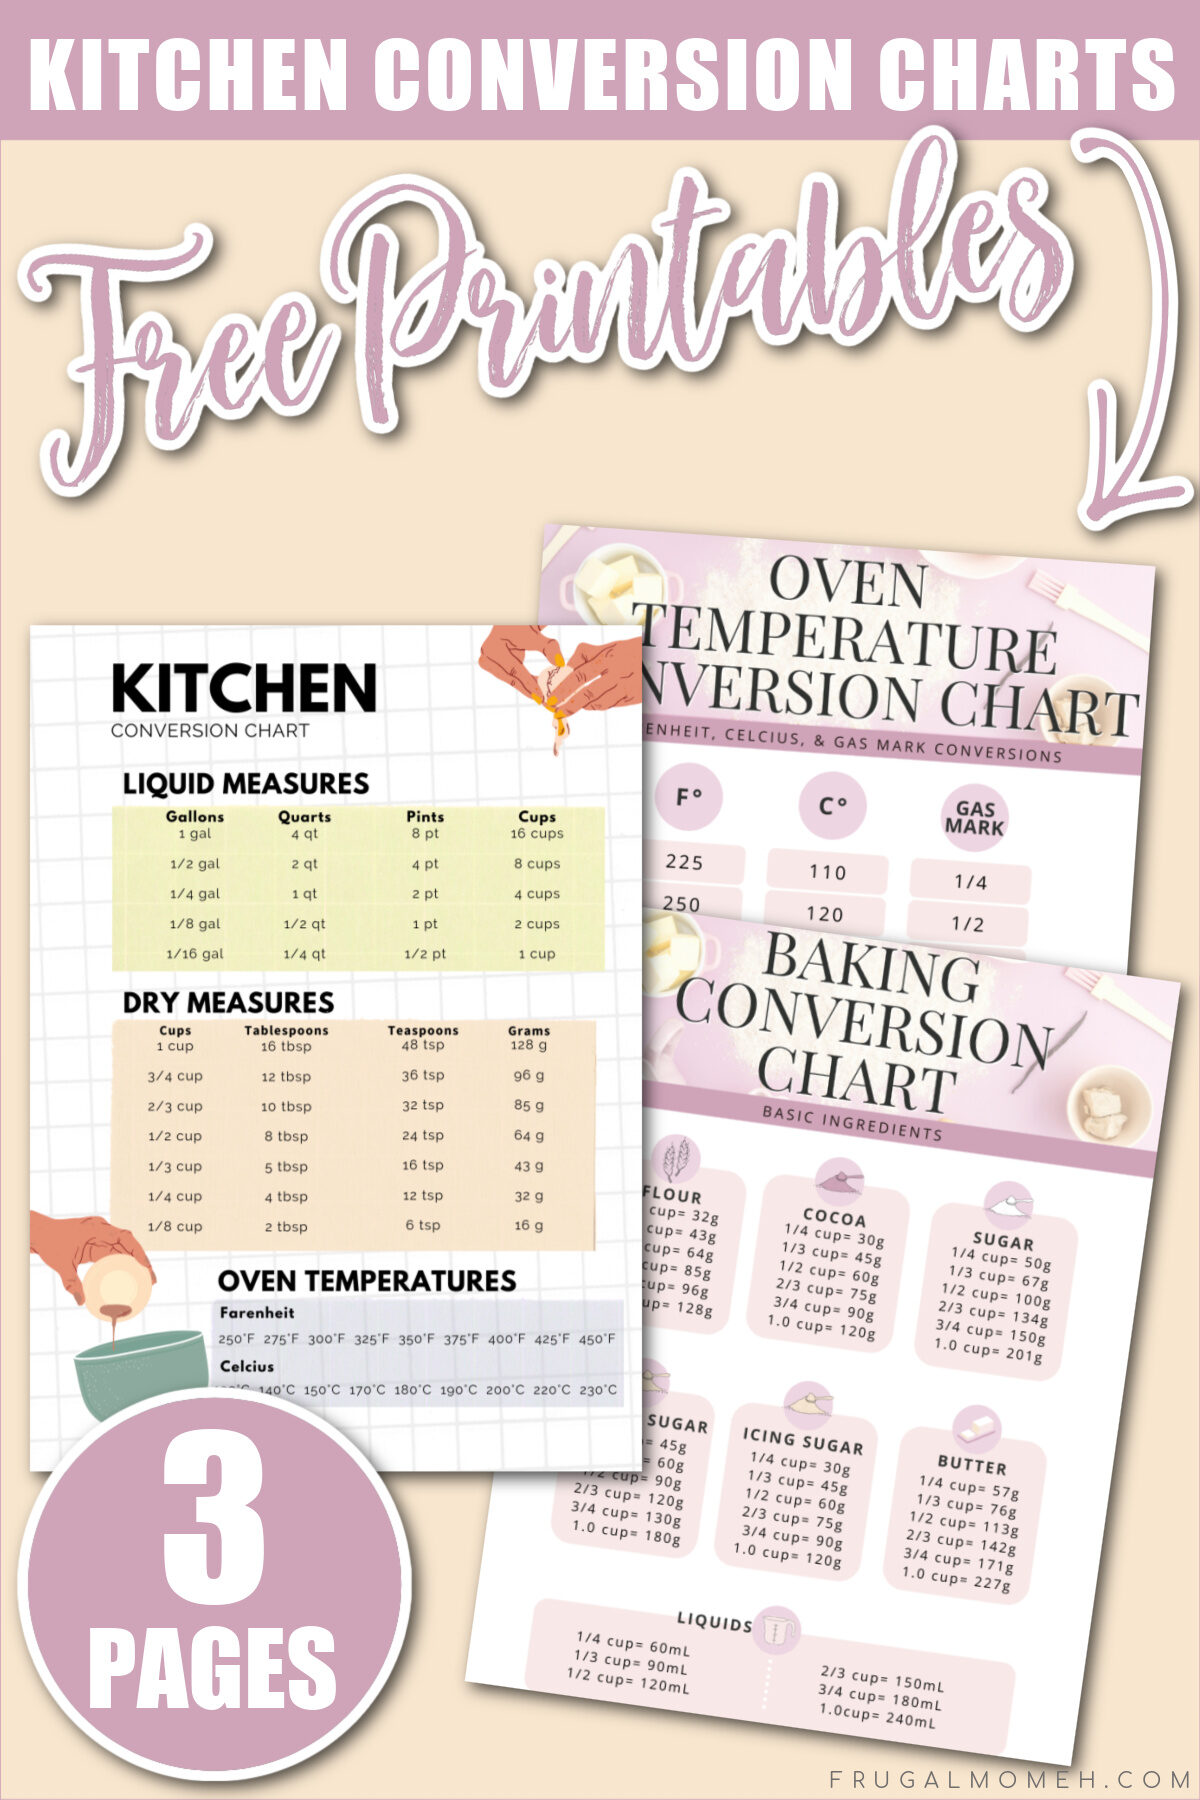 This free printable kitchen conversion chart is perfect for any home cook! It includes measurements for volume, weight, and temperature.